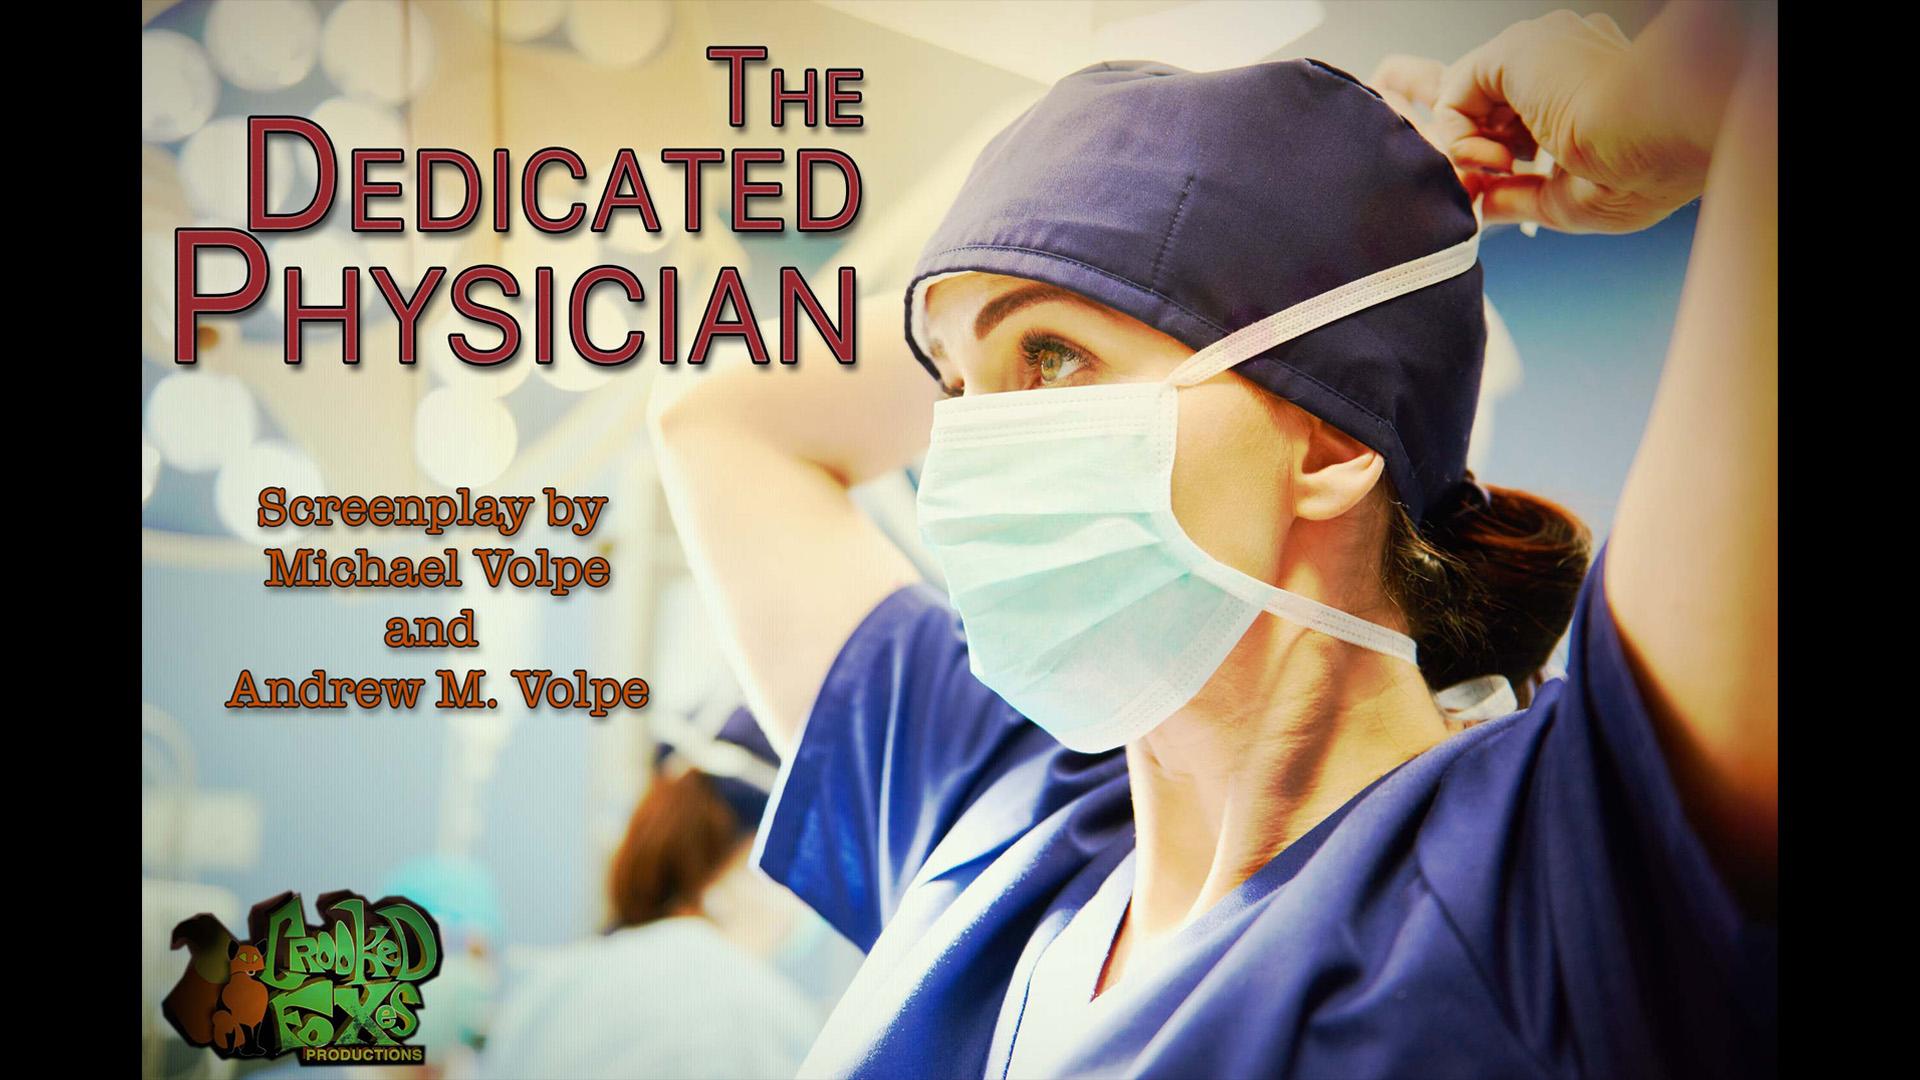 THE DEDICATED PHYSICIAN